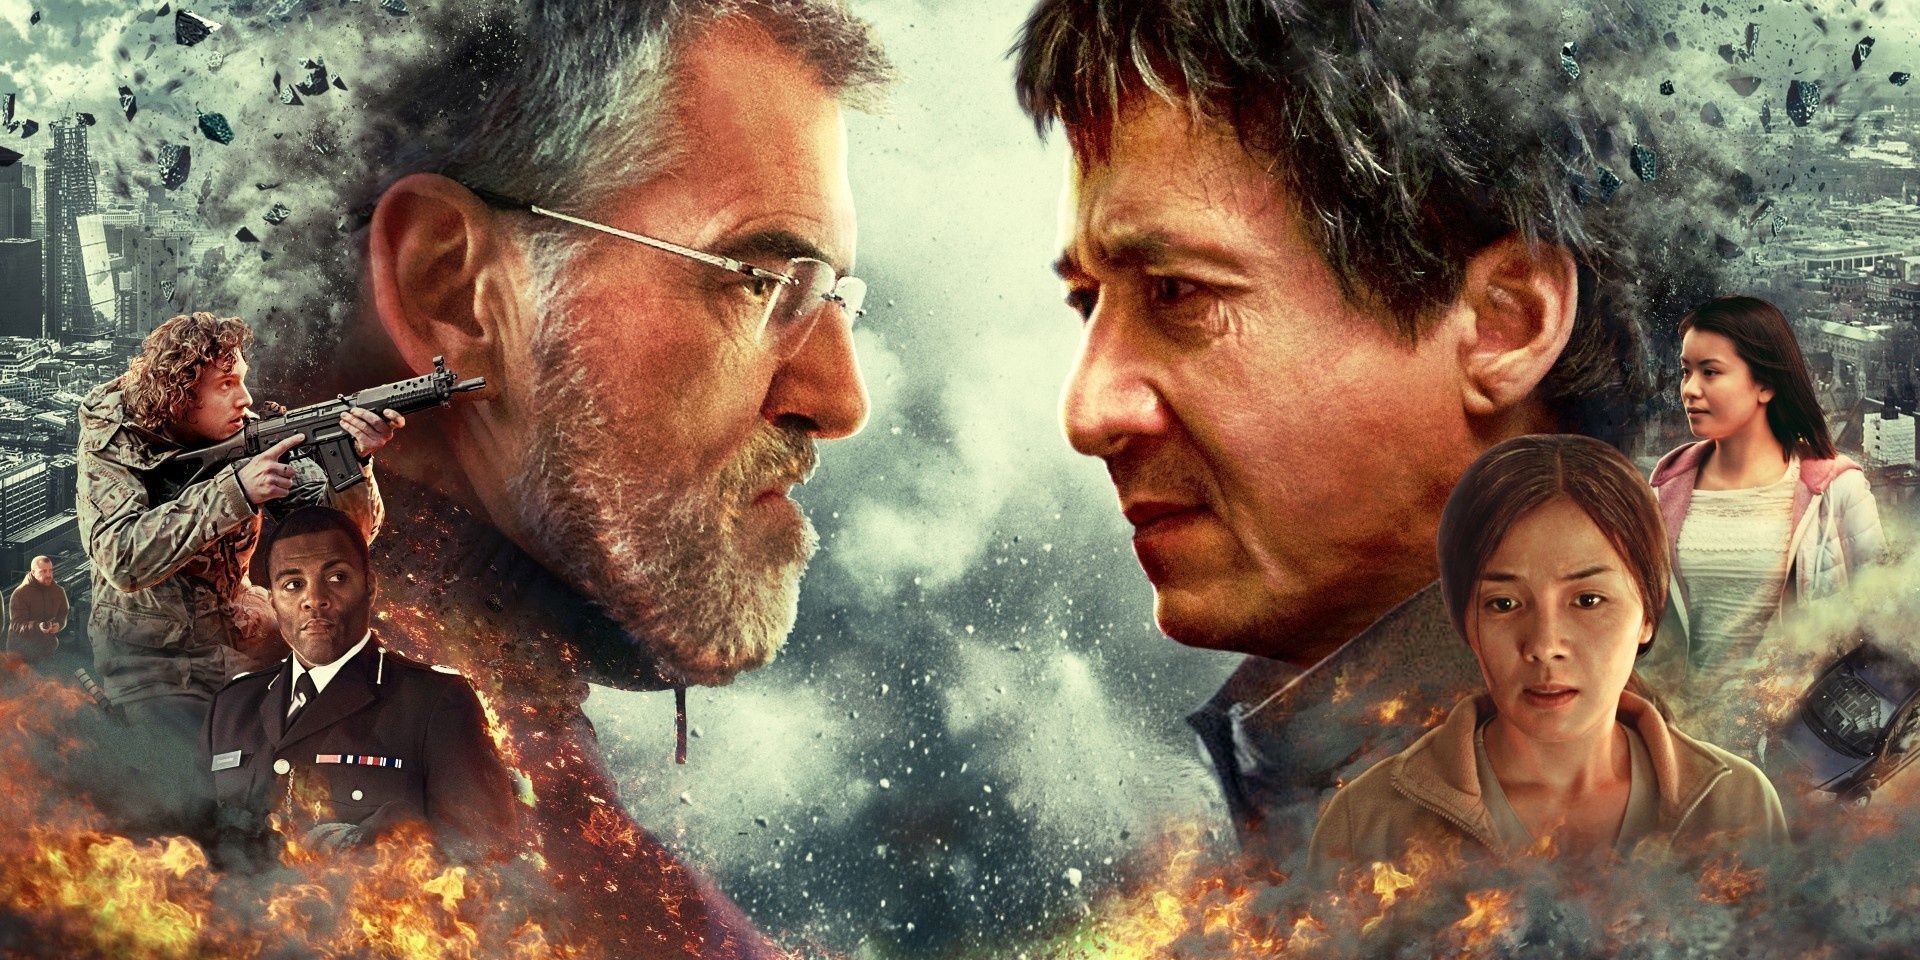 Jackie Chan And Pierce Brosnan Star In This Underrated Action Movie